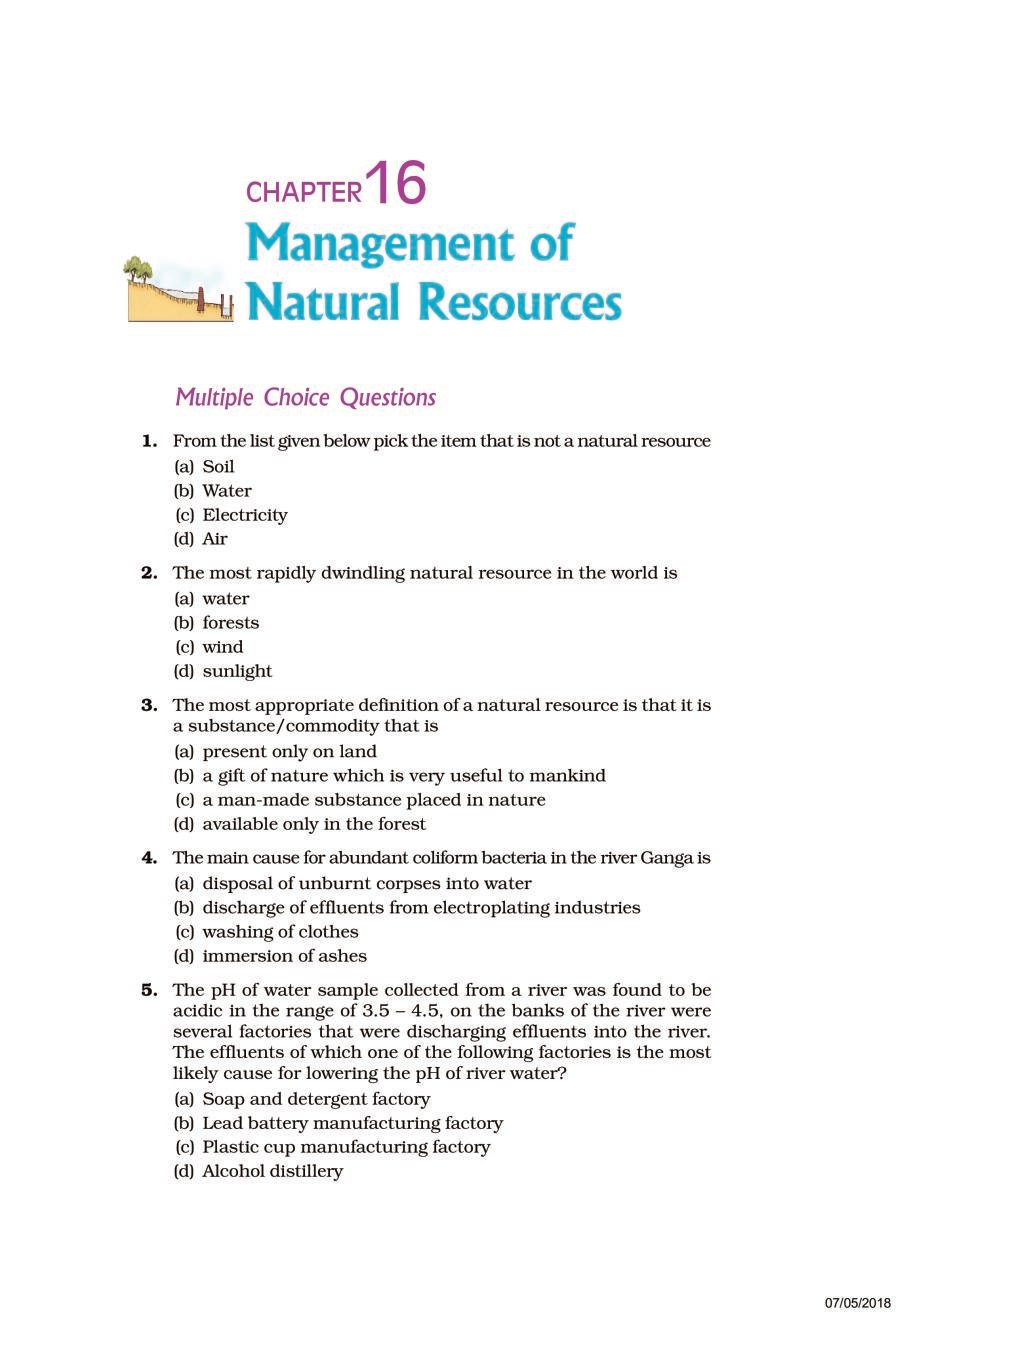 NCERT Exemplar Class 10 Science Unit 16 Management of Natural Resources - Page 1